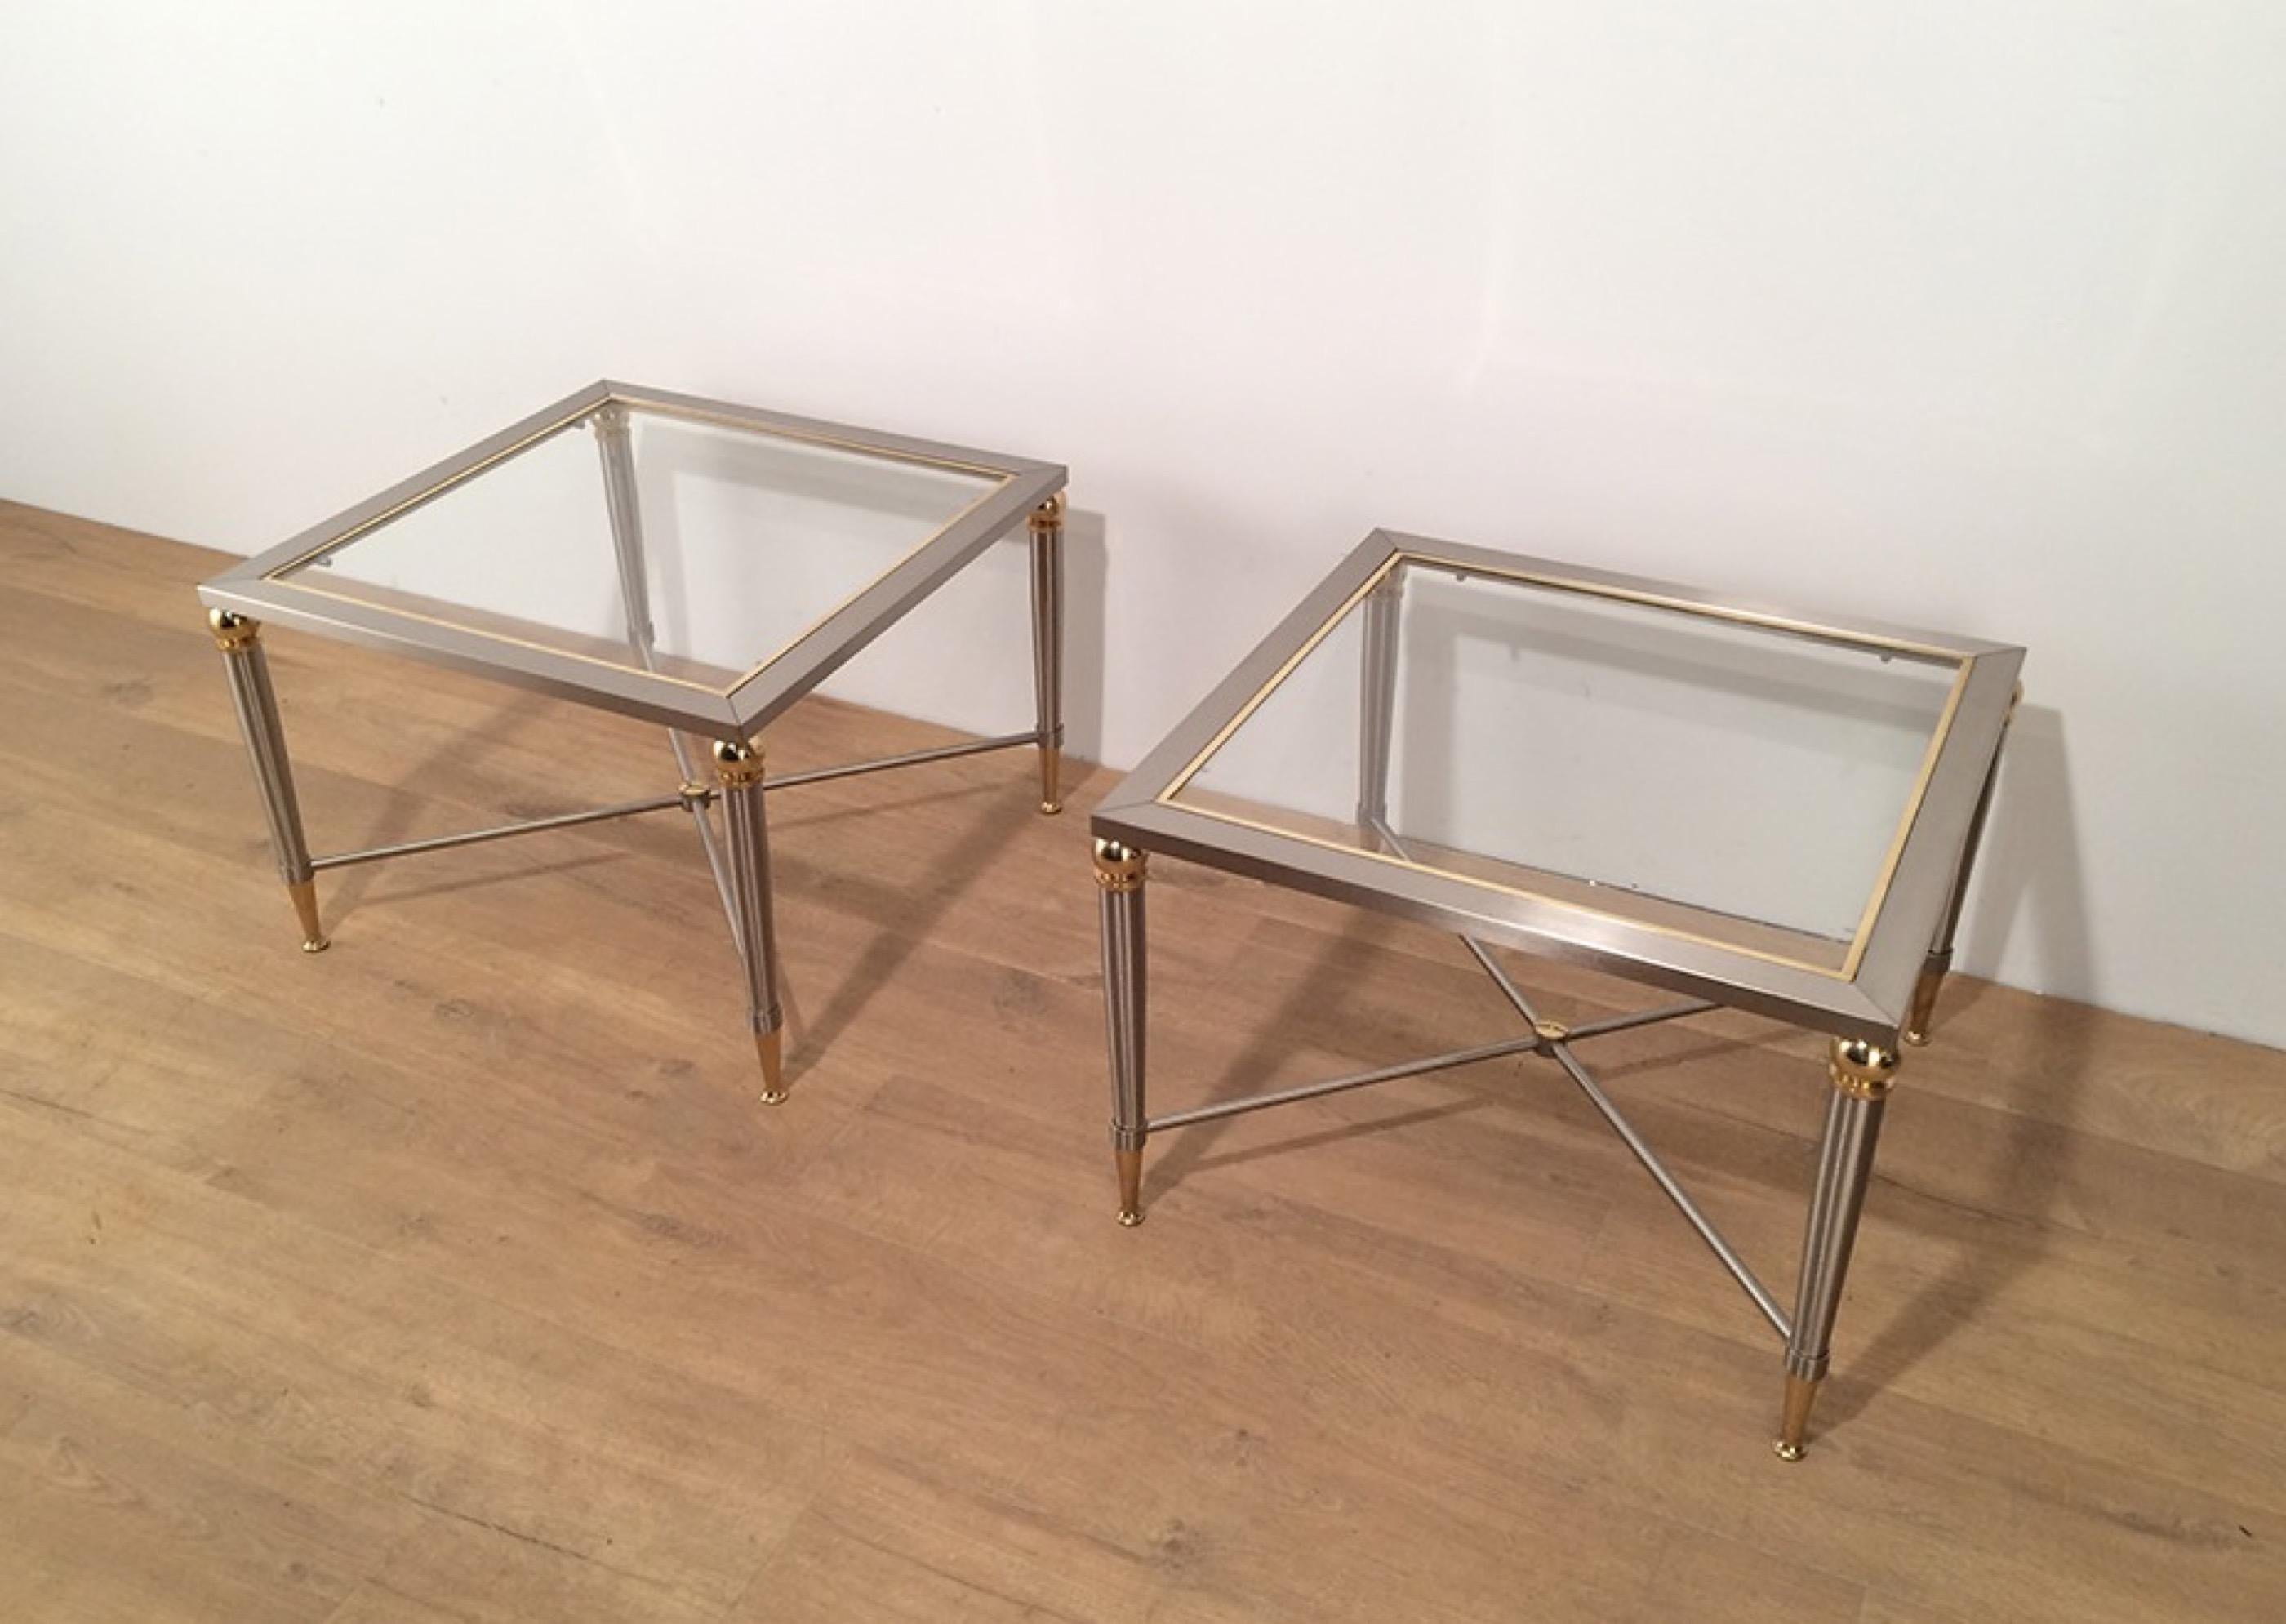 This pair of neoclassical side tables is made of brushed steel and brass. Each end table has glass on top, surrounded by a brass frame and a stretcher on the bottom made of brushed steel cross with a brass decoration on its center. They are very